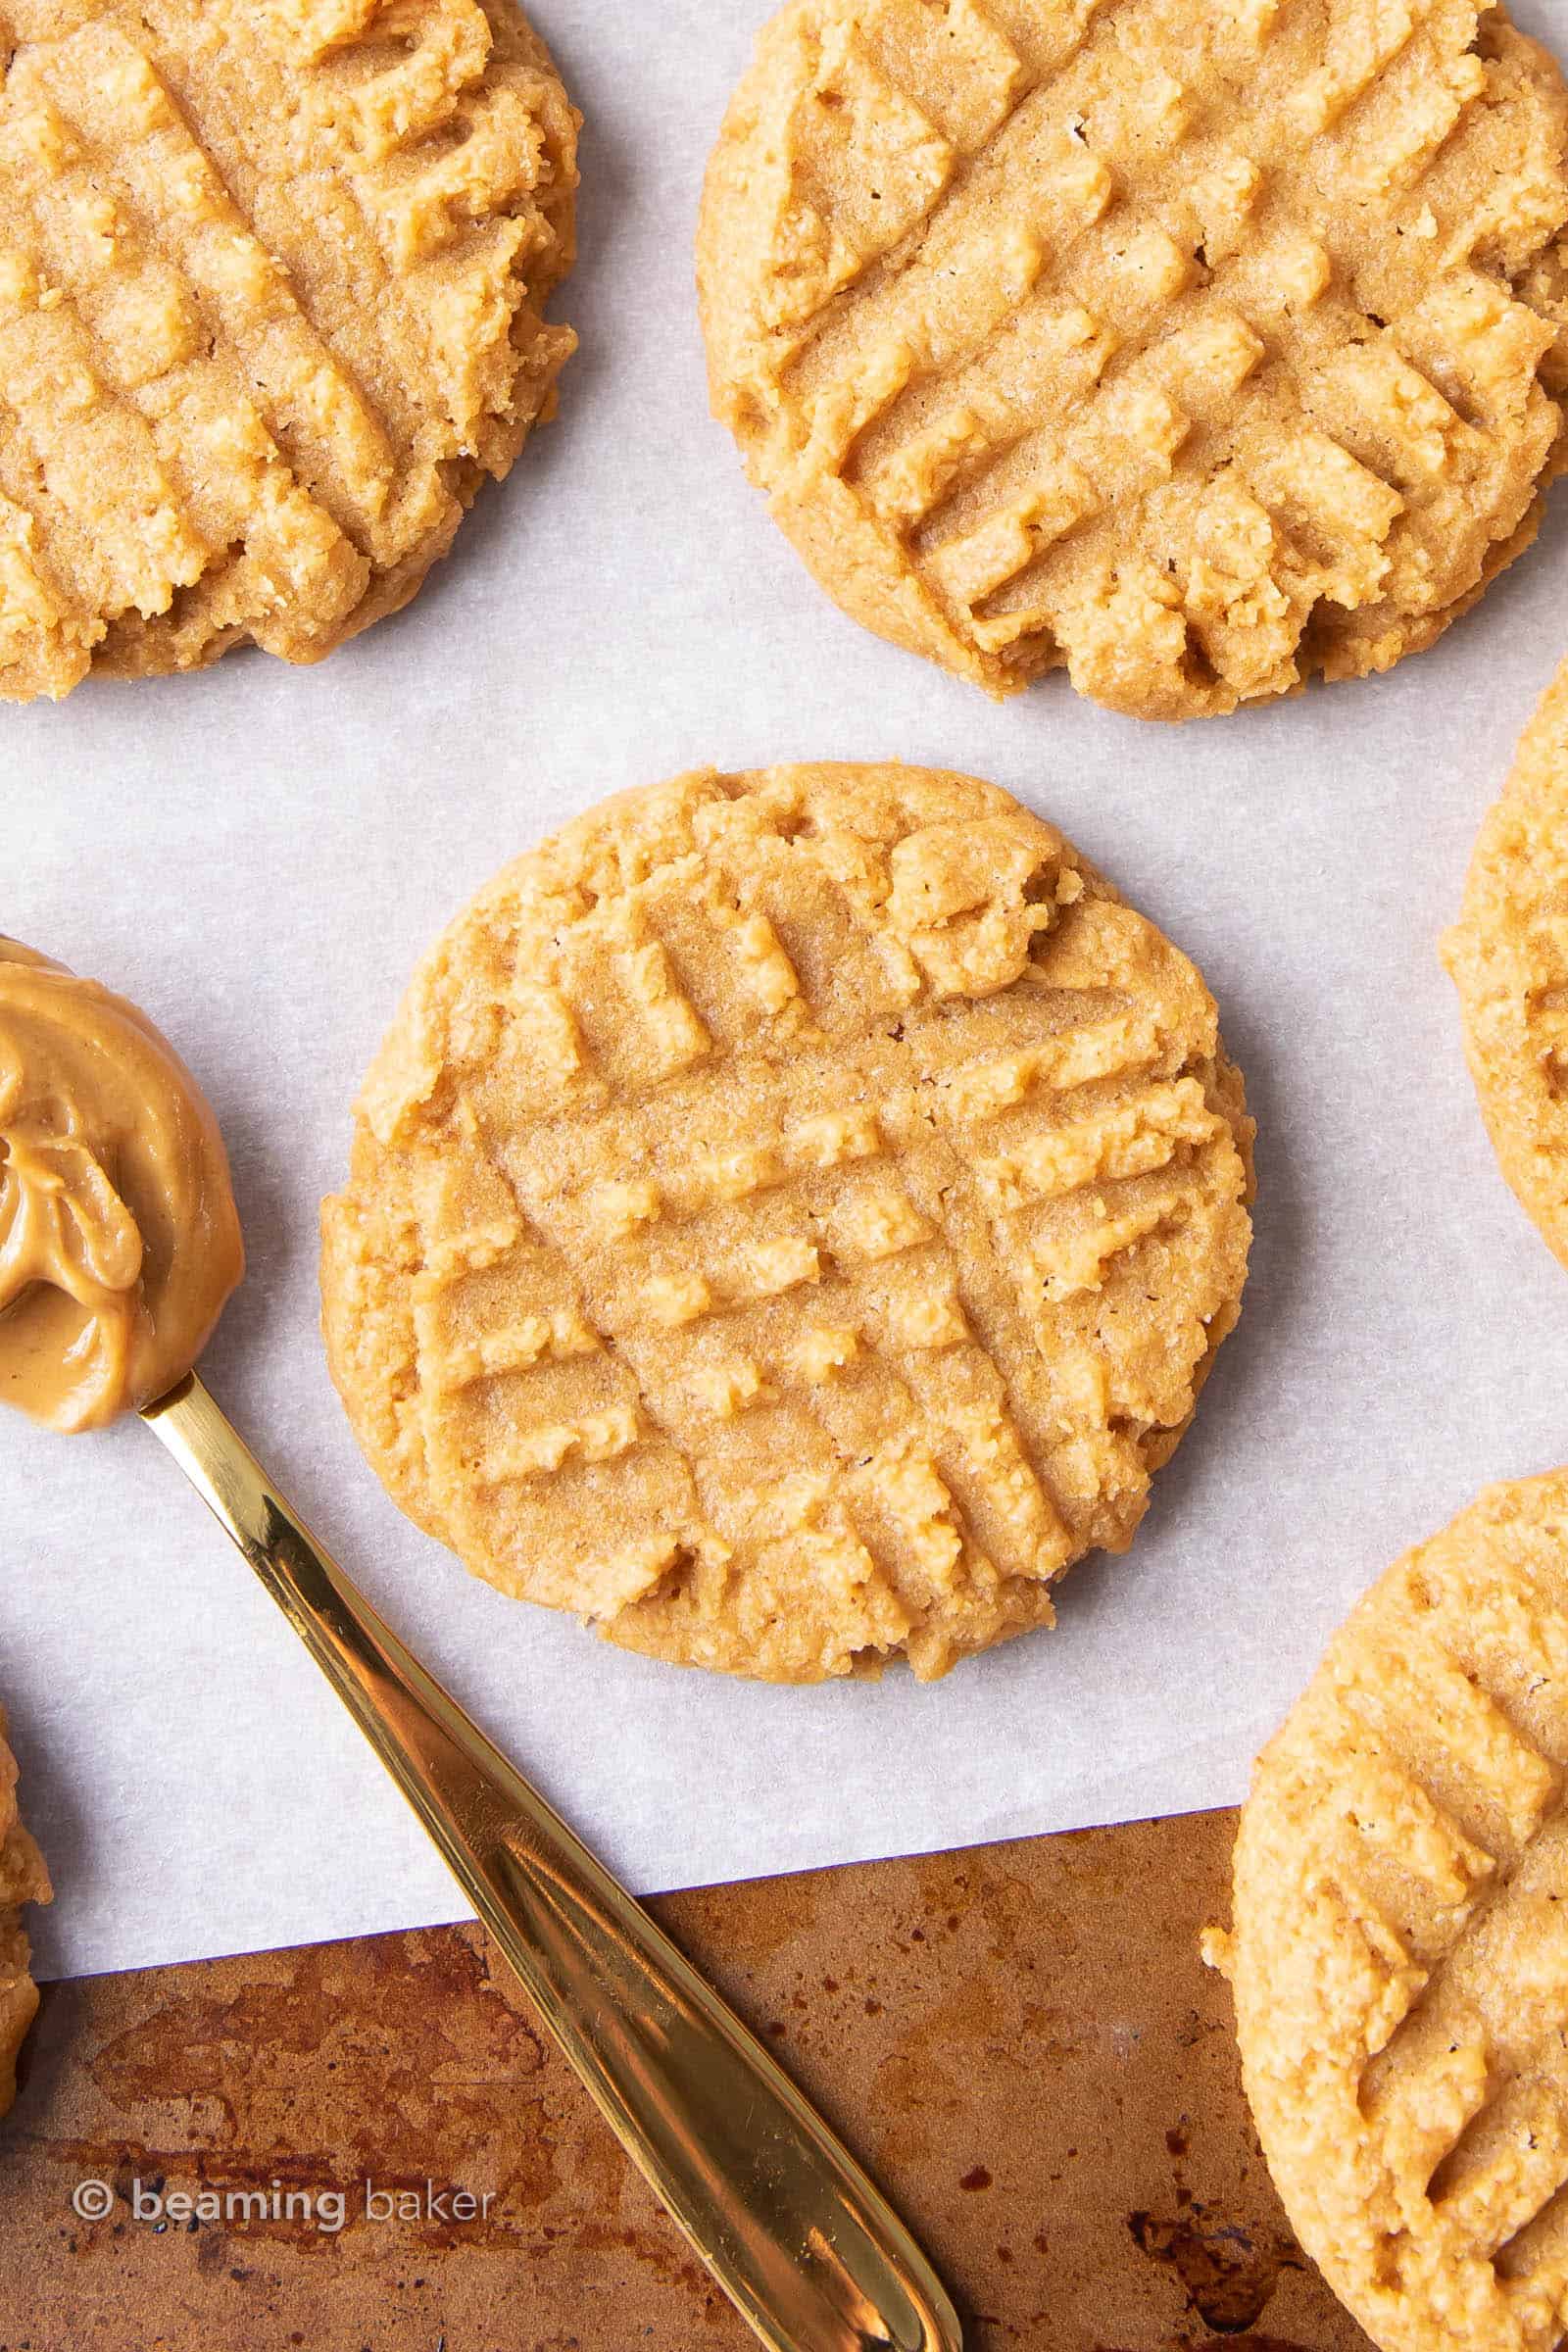 Keto Peanut Butter Cookies: this low carb peanut butter cookies recipe is made with only 4 ingredients. The best peanut butter keto cookies—only 2 net carbs and keto-friendly. #Keto #KetoCookies #PeanutButter #LowCarb | Recipe at BeamingBaker.com